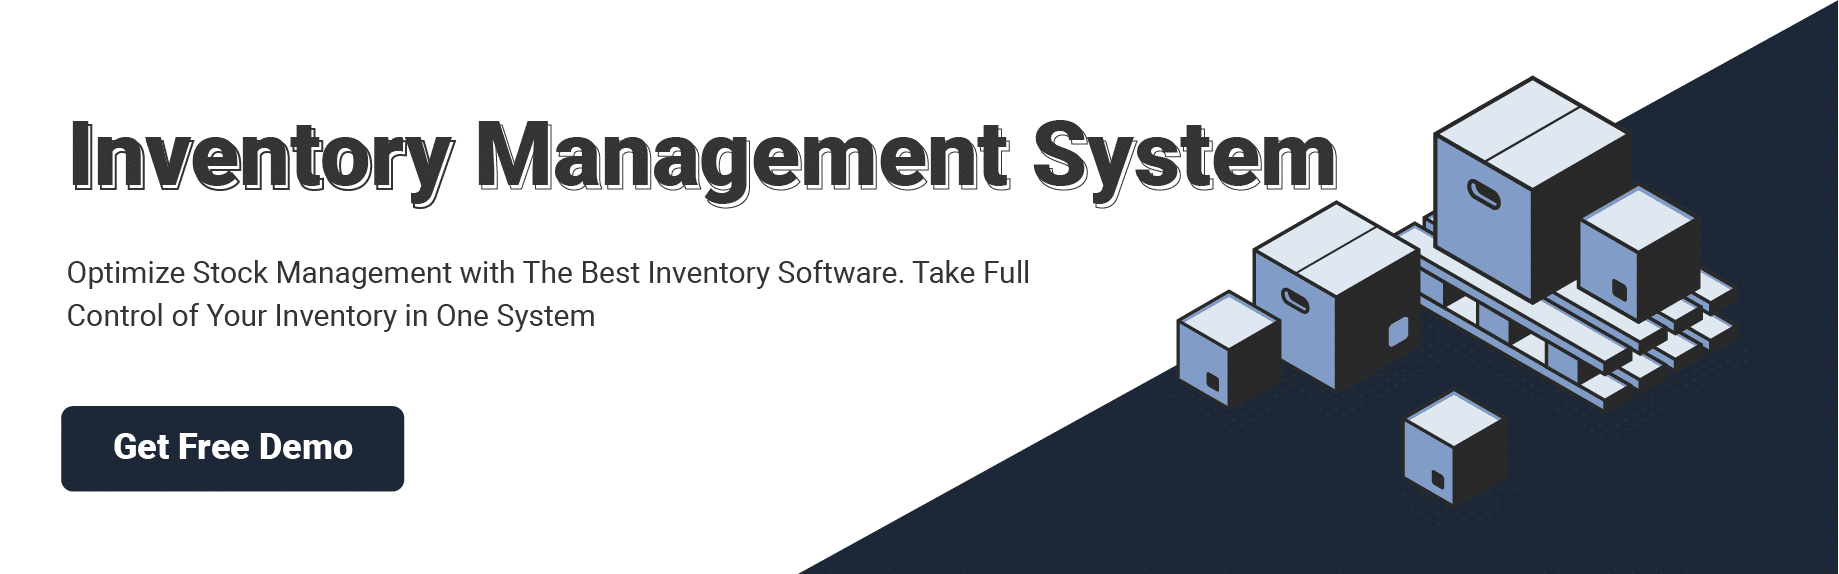 select inventory management system